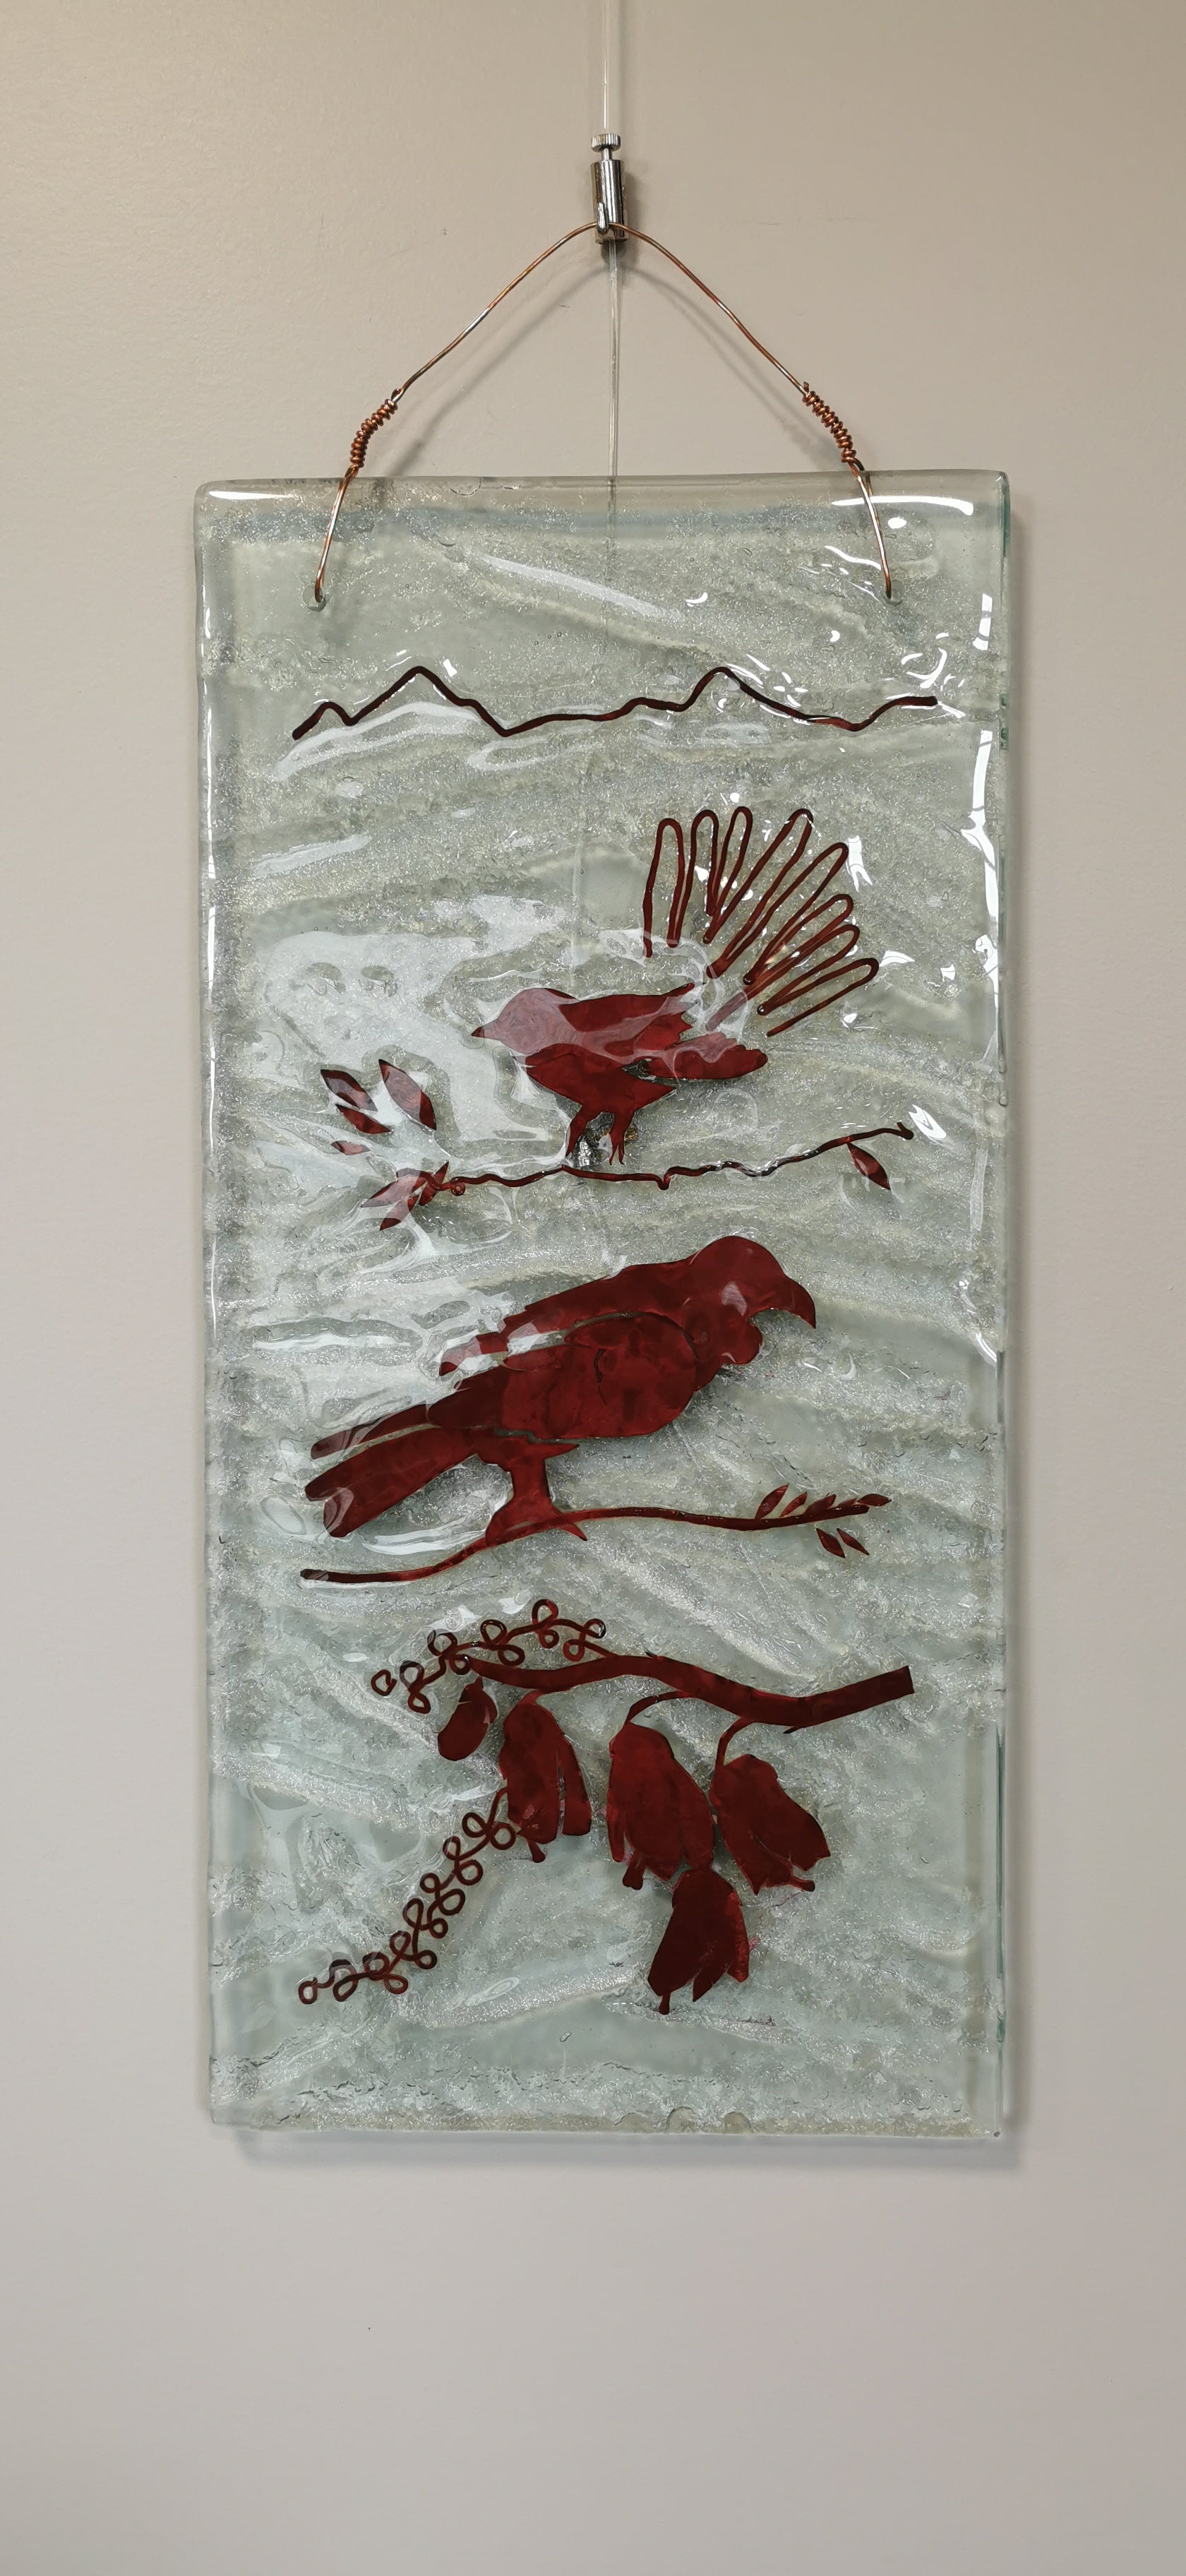 Copper and Glass Fantail and Tūi wall art piece. Fused glass with copper entwined